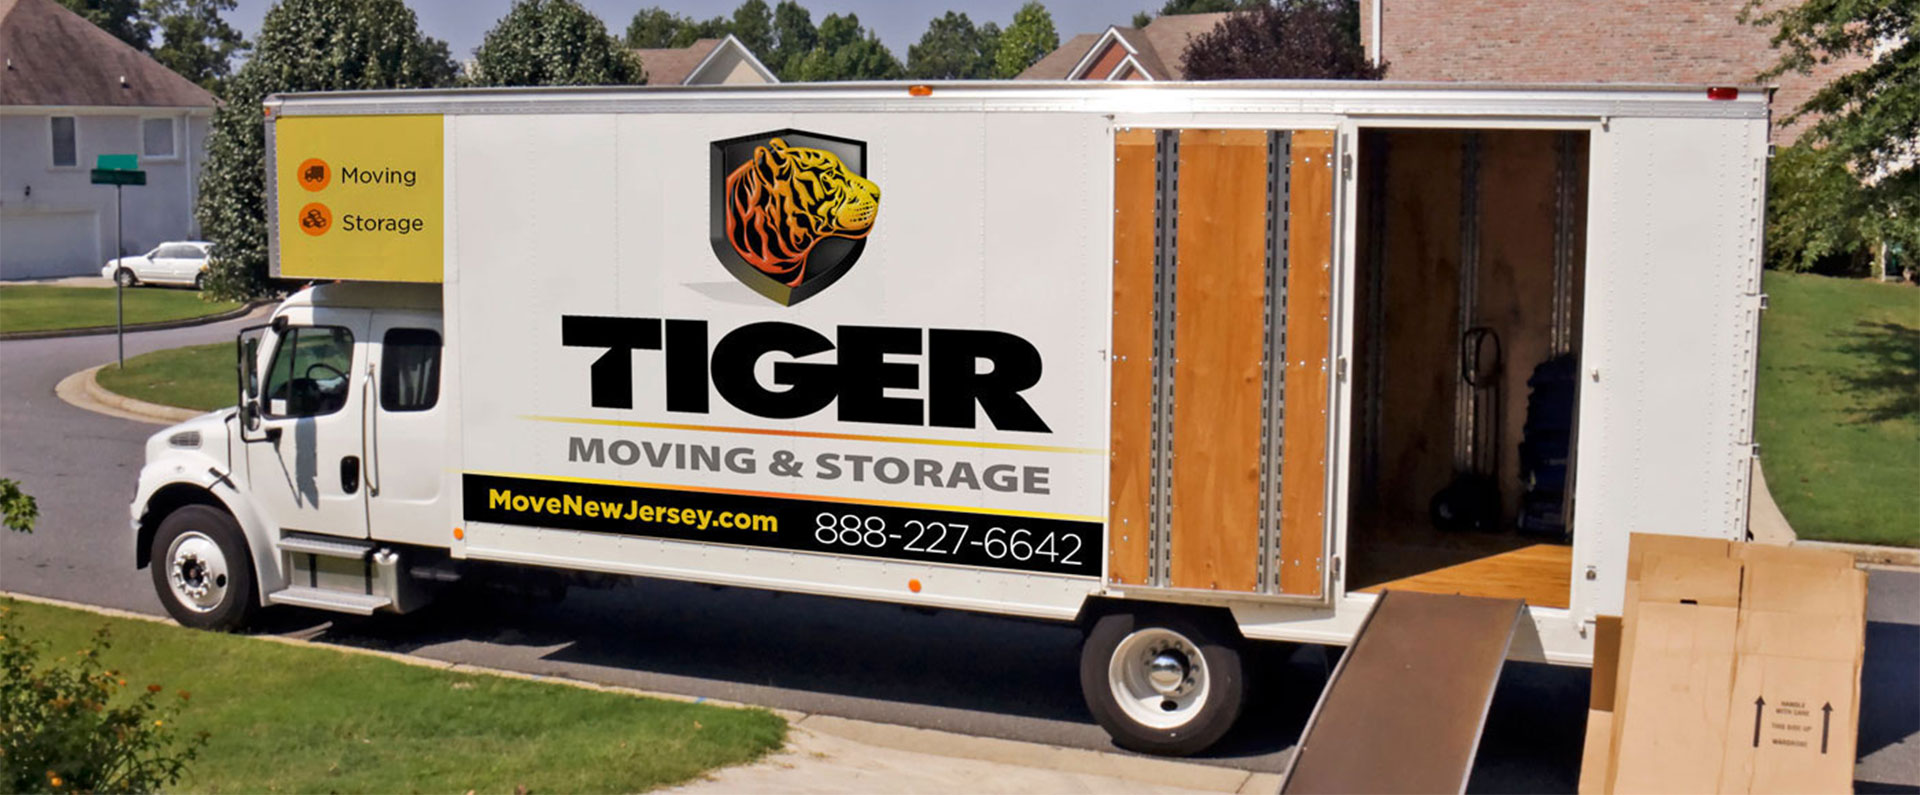 Moving And Storage Companies Who Can Help You Rightsize In Week 4